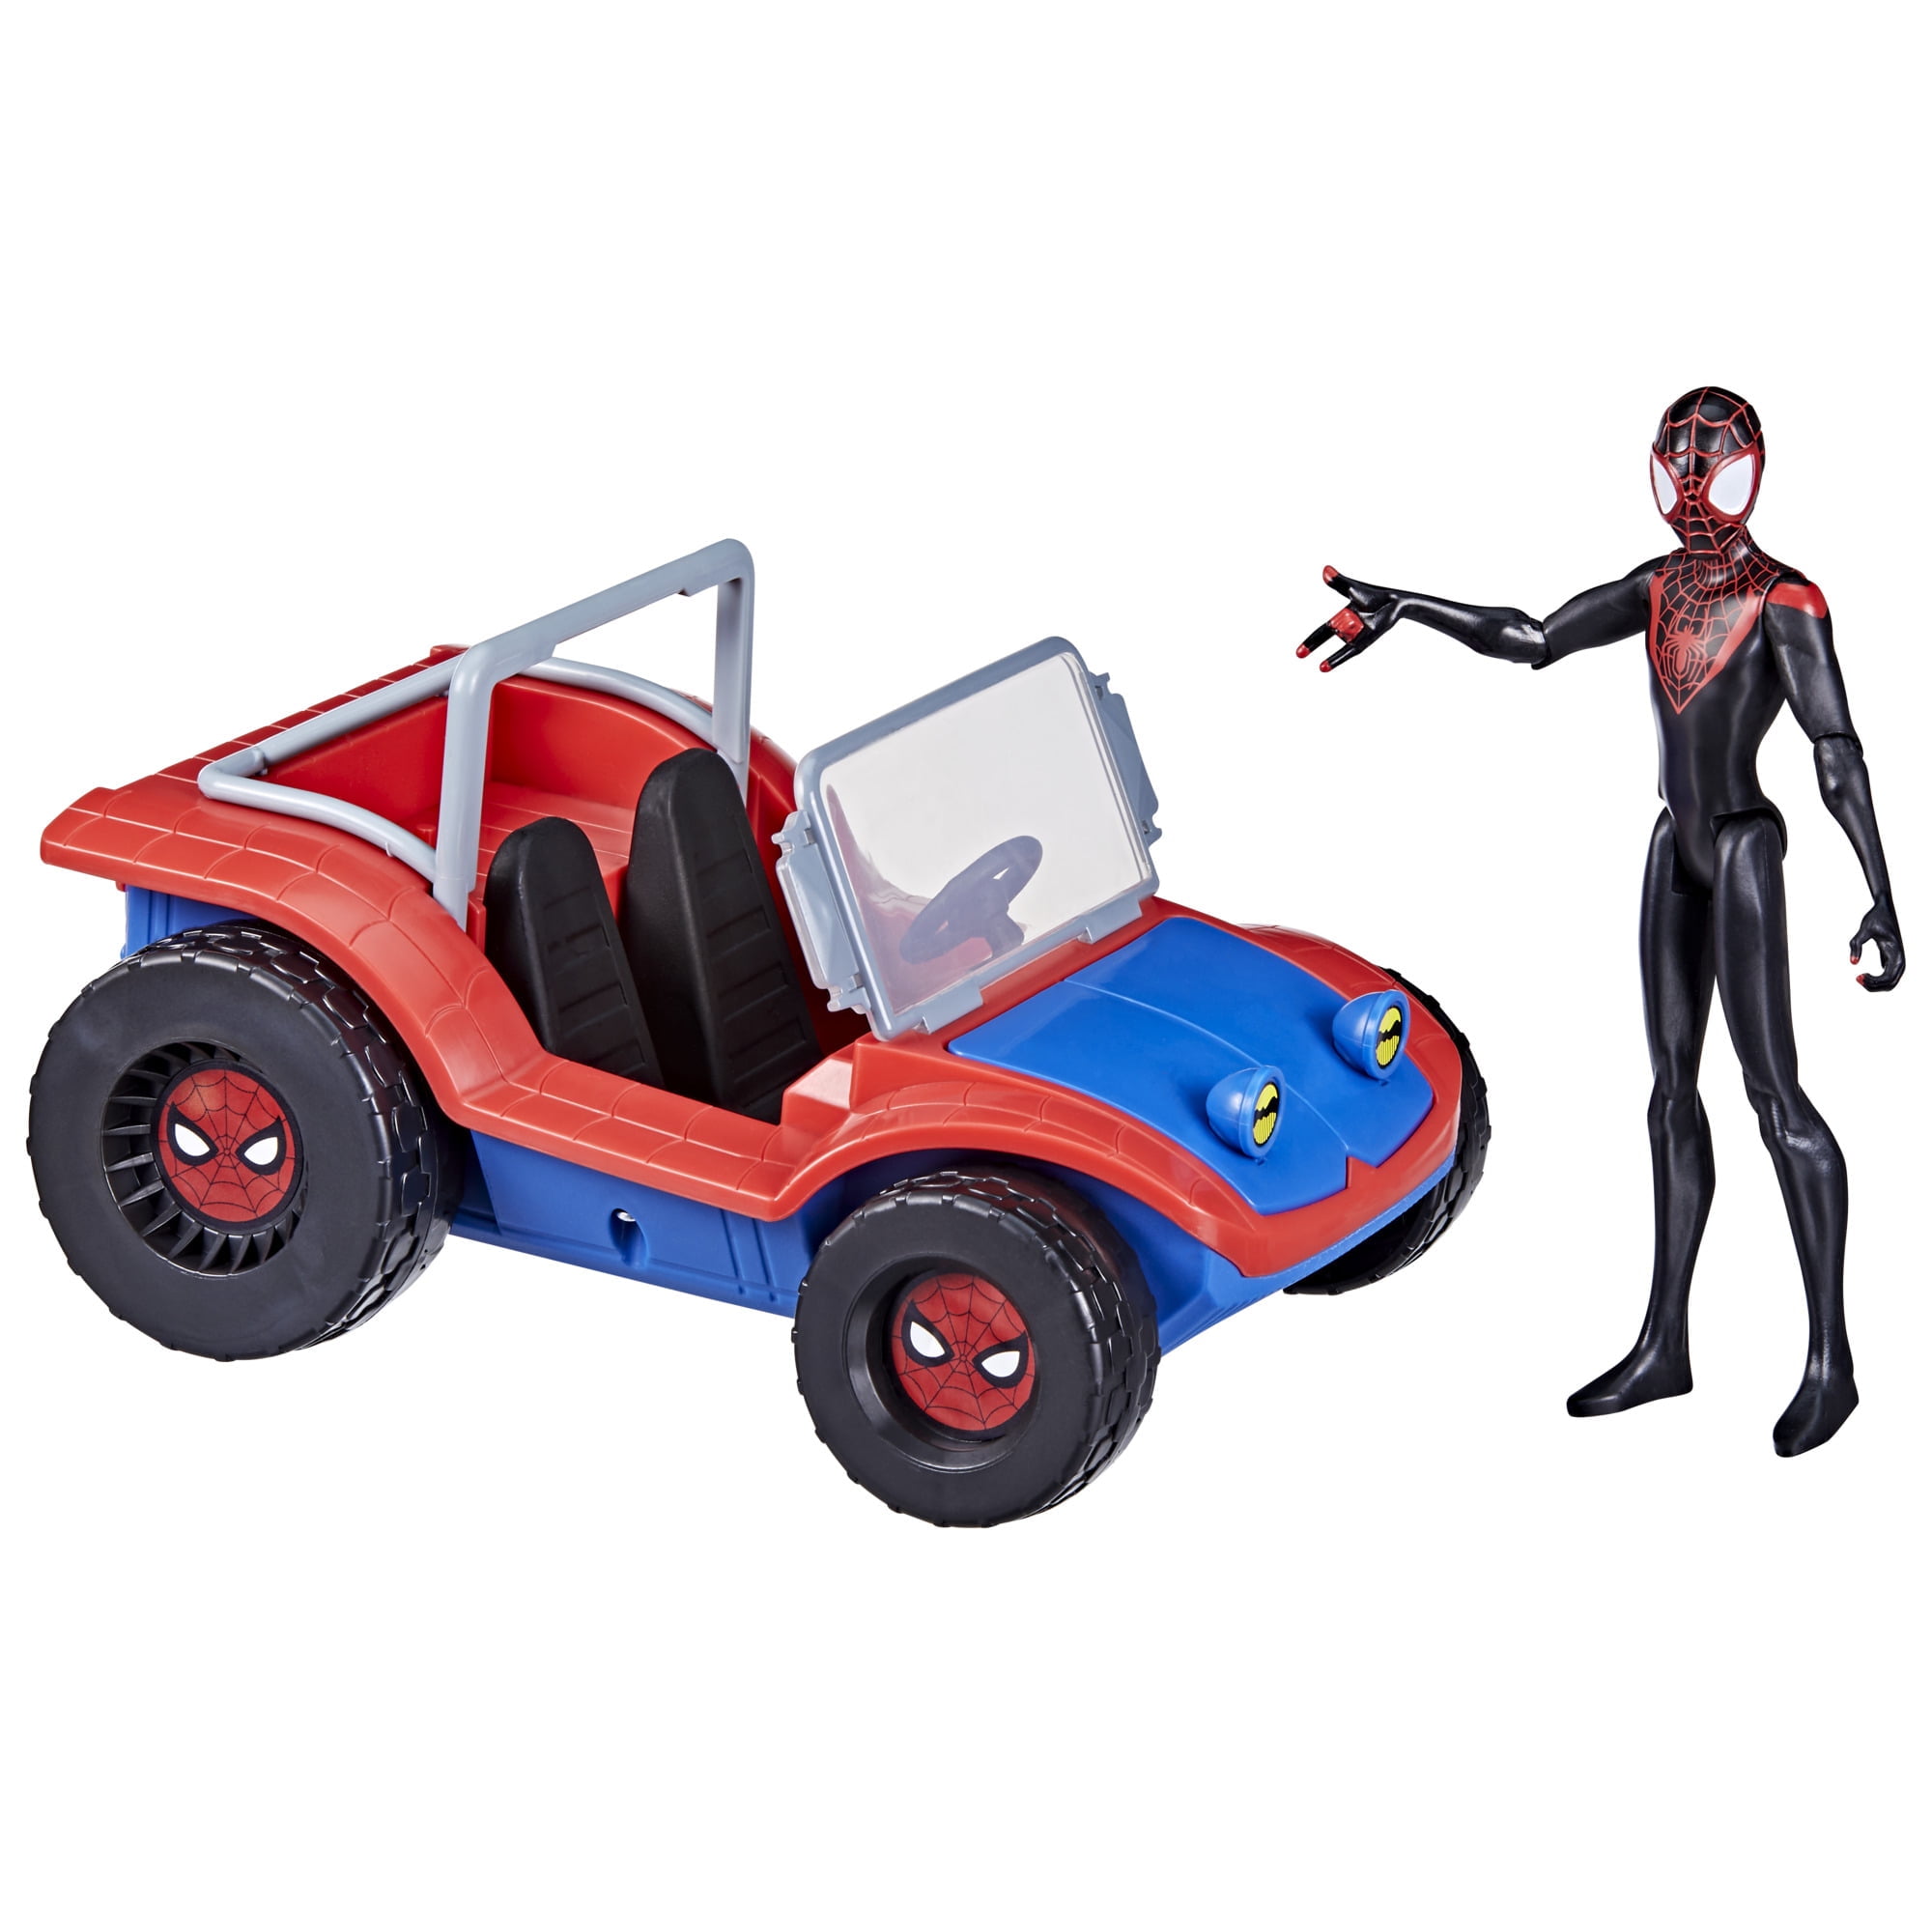 Spider-Man: Marvel Spider-Mobile Vehicle and Miles Morales Action Figure (6")